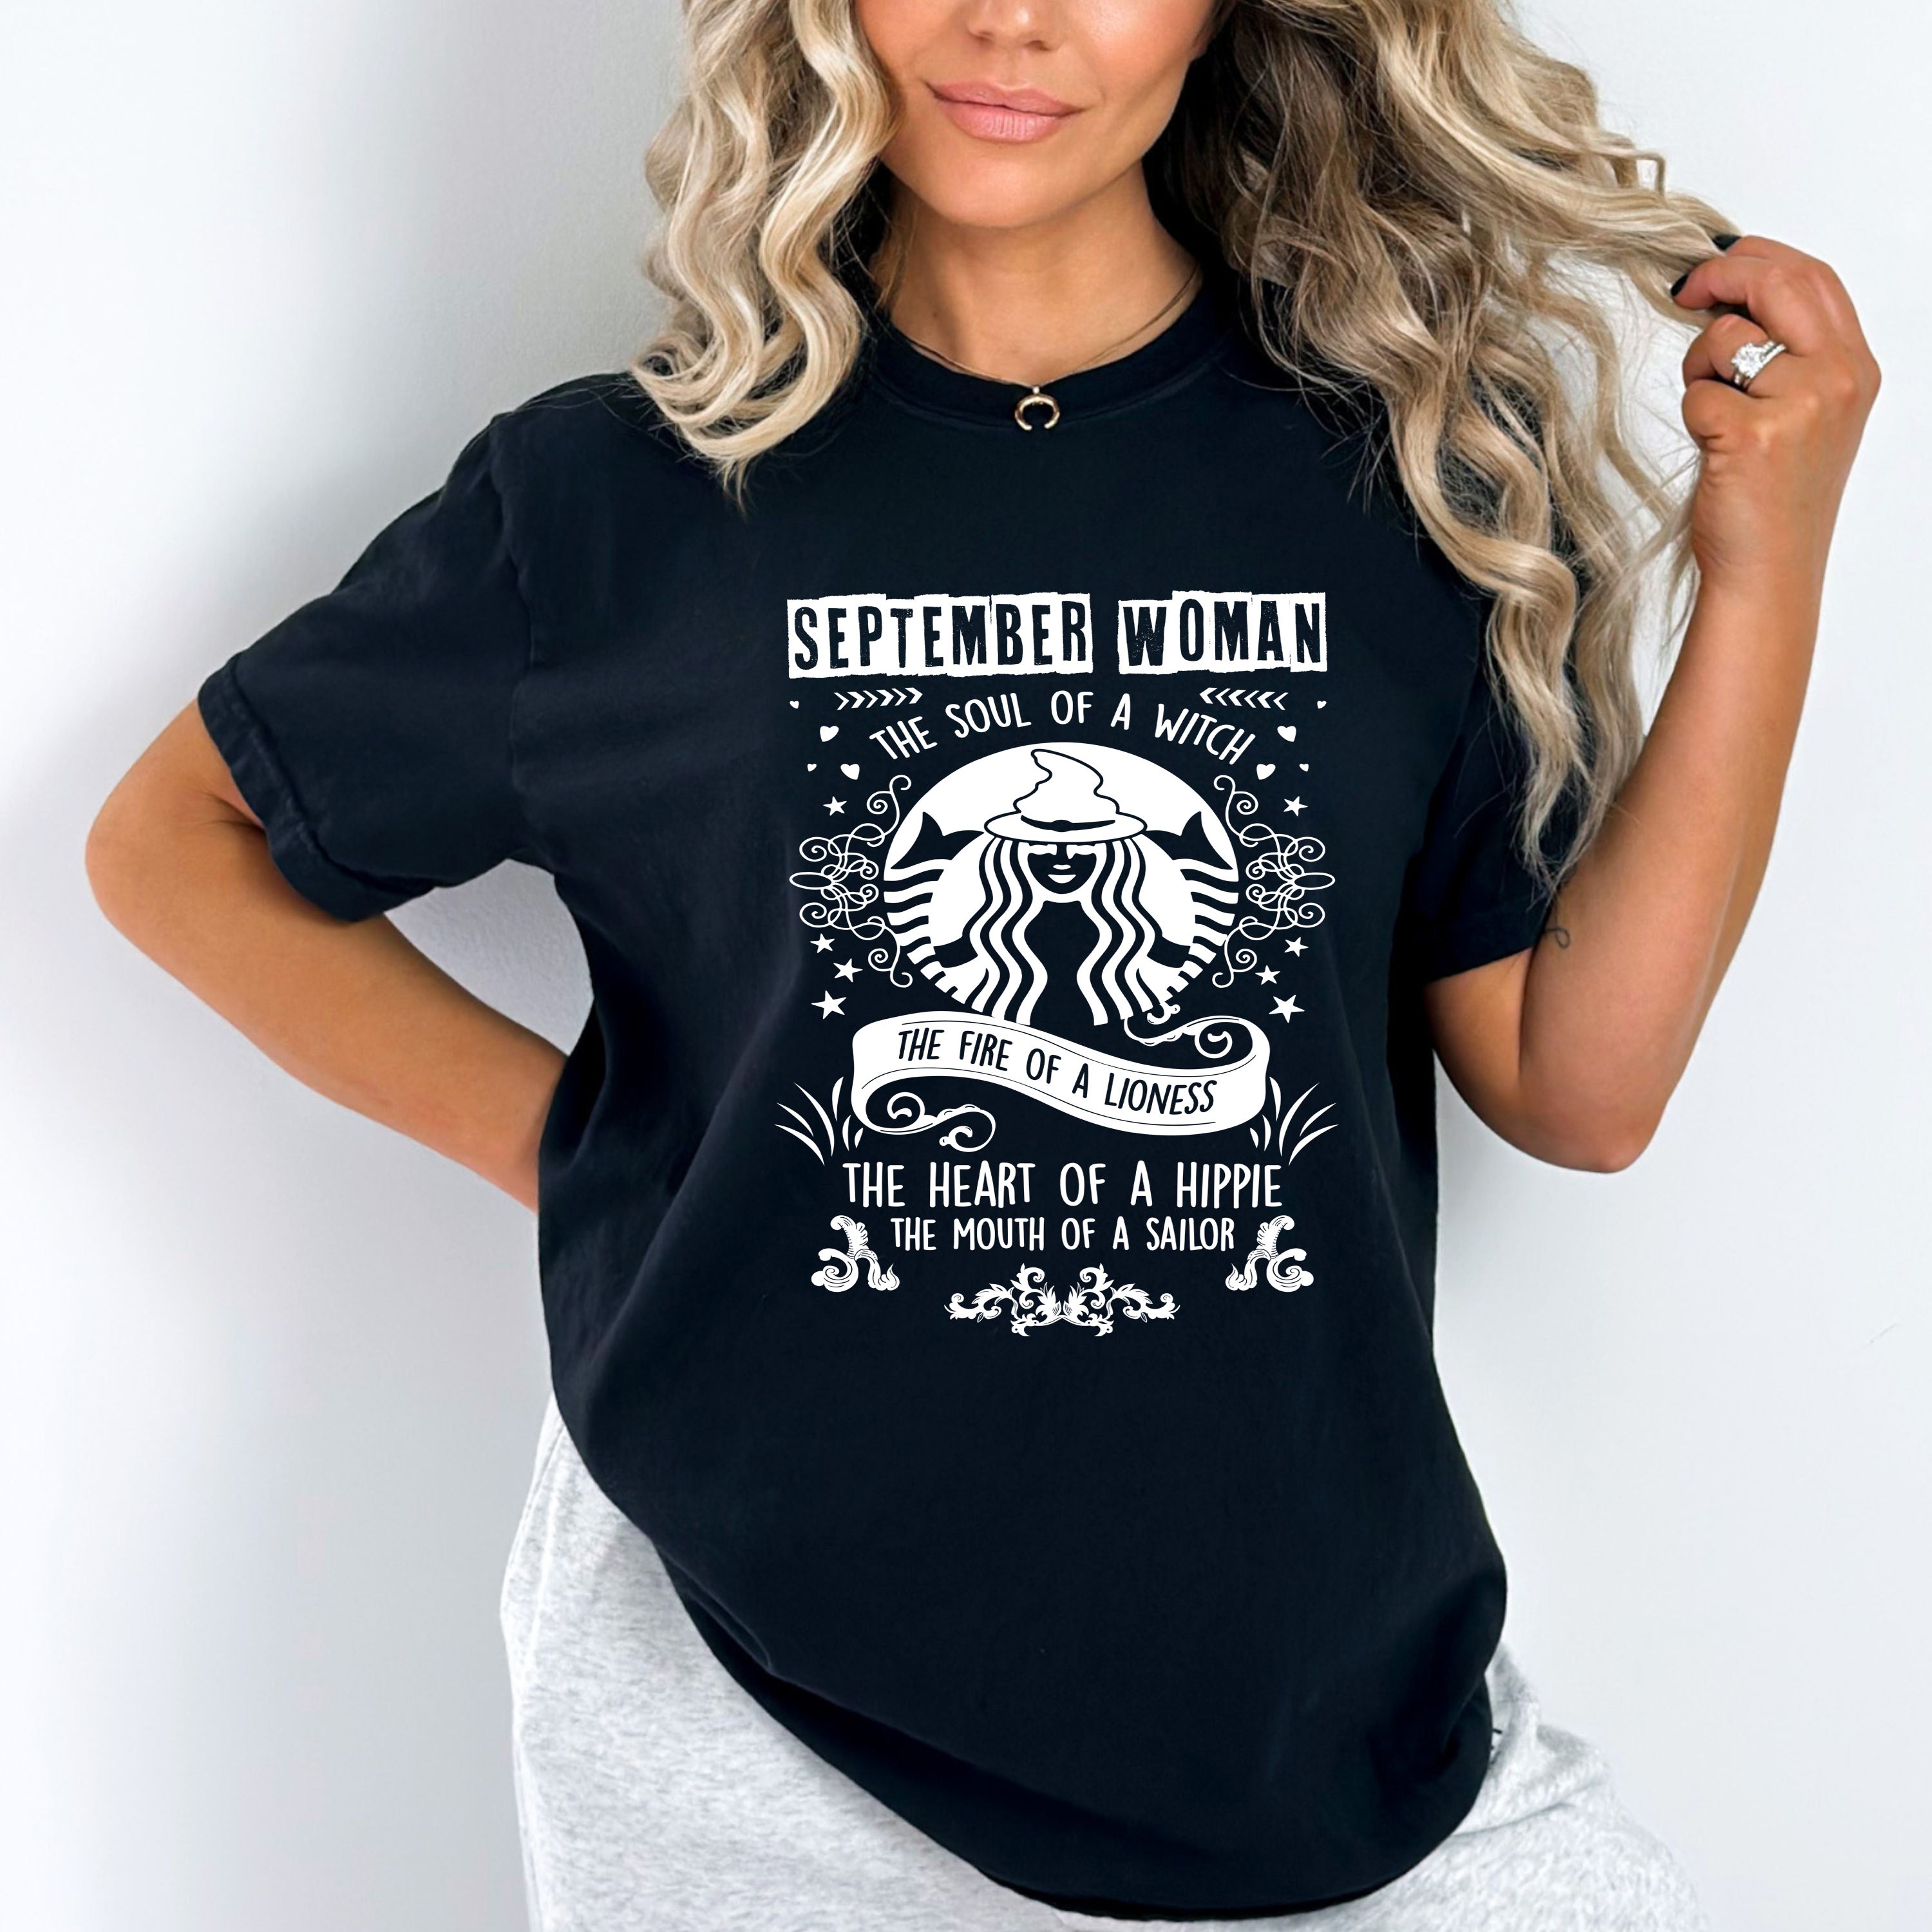 "SEPTEMBER WOMAN The Soul Of A Witch The Fire Of A Lioness The Heart Of A Hippie...",T-Shirt.